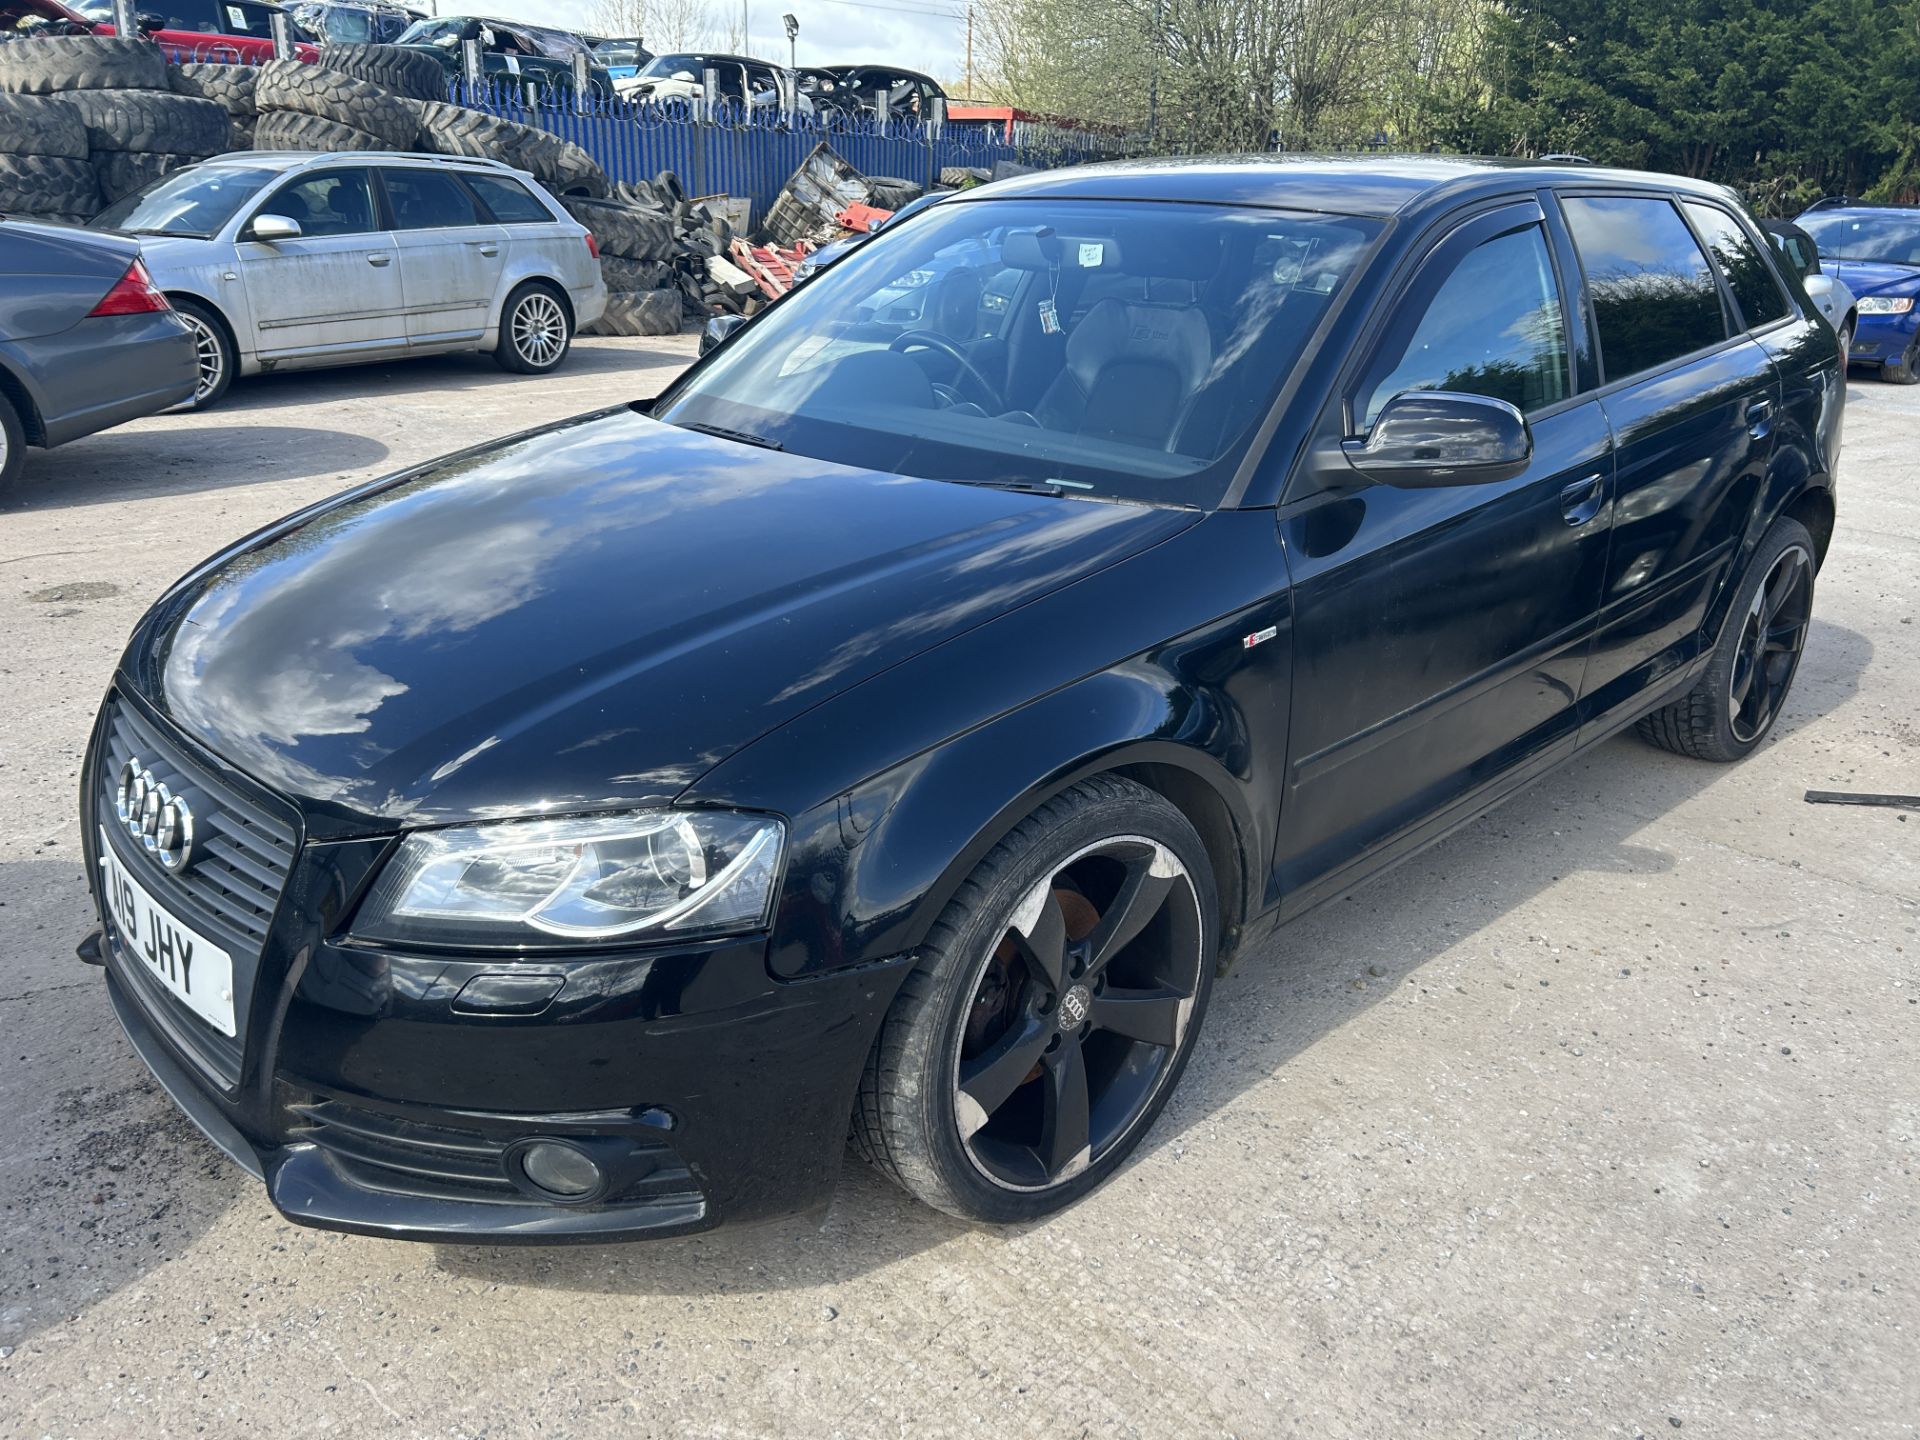 Audi A3 S Line SP TDI 138 Diesel 5 Door Hatchback | GY61 AOU | Mileage: TBC - Image 3 of 11